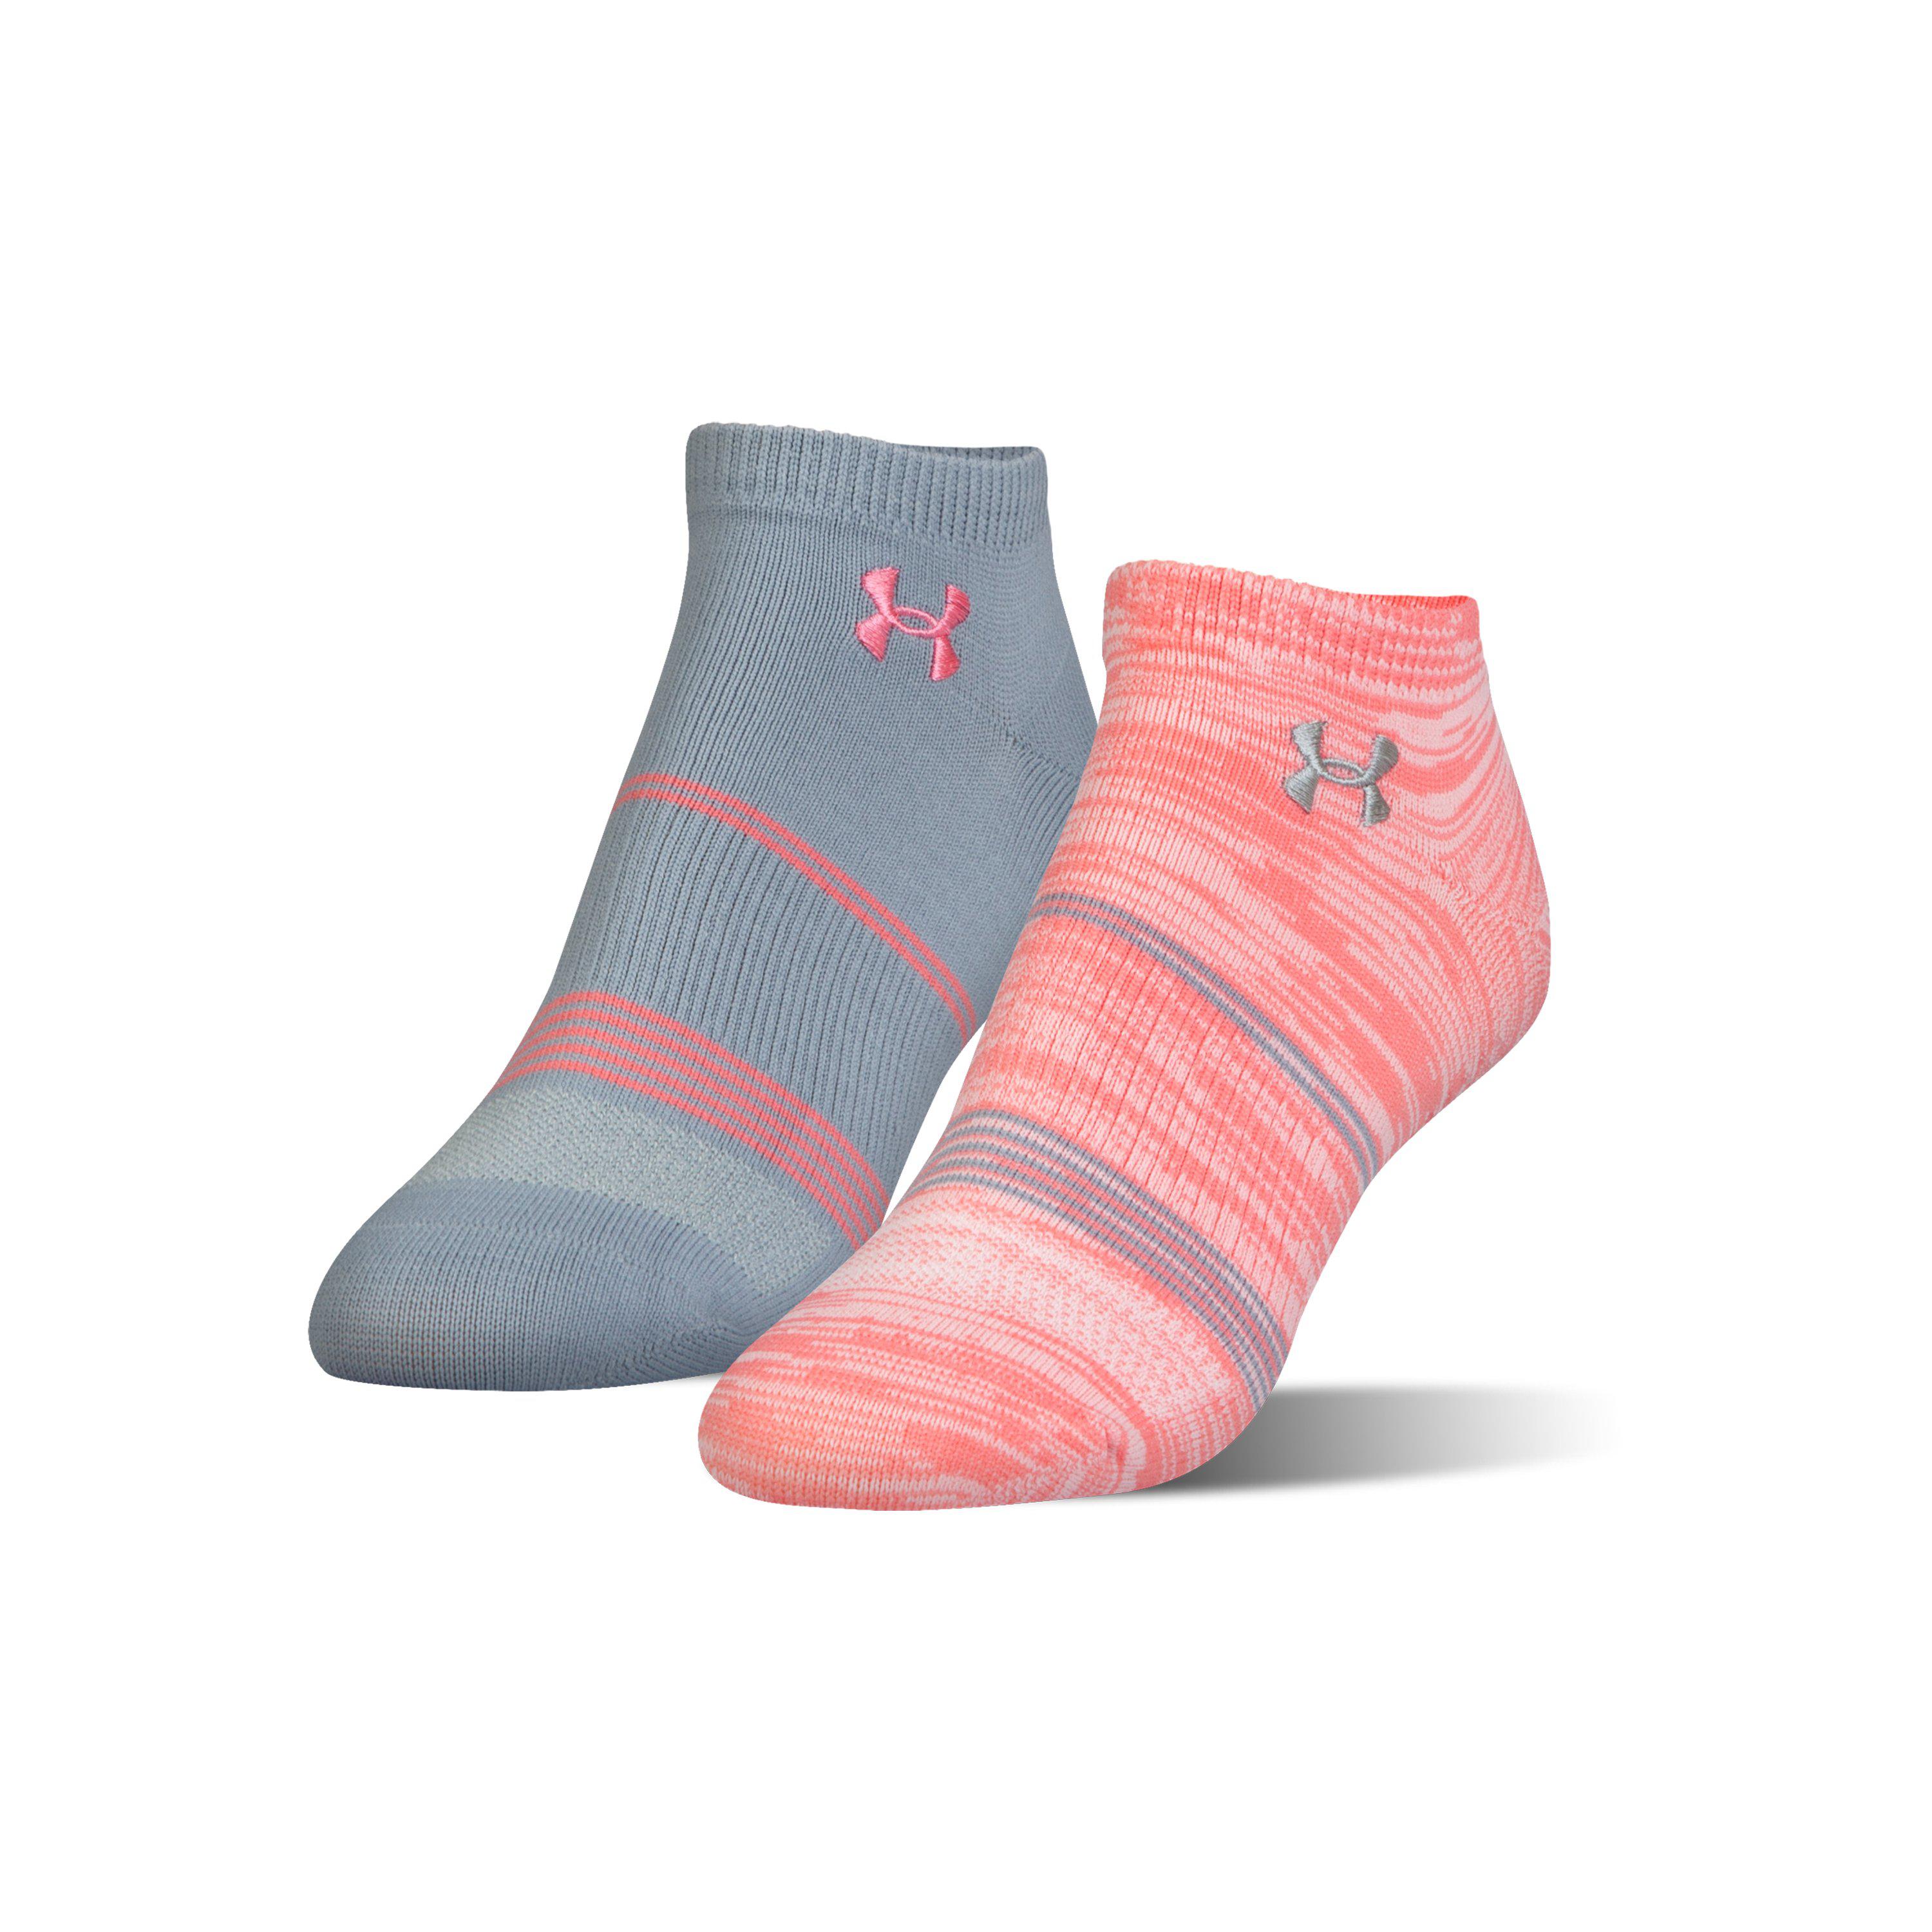 Enciclopedia Permiso mitología Under Armour Women's Ua Grippy Iii No Show Socks 2-pack in Pink | Lyst